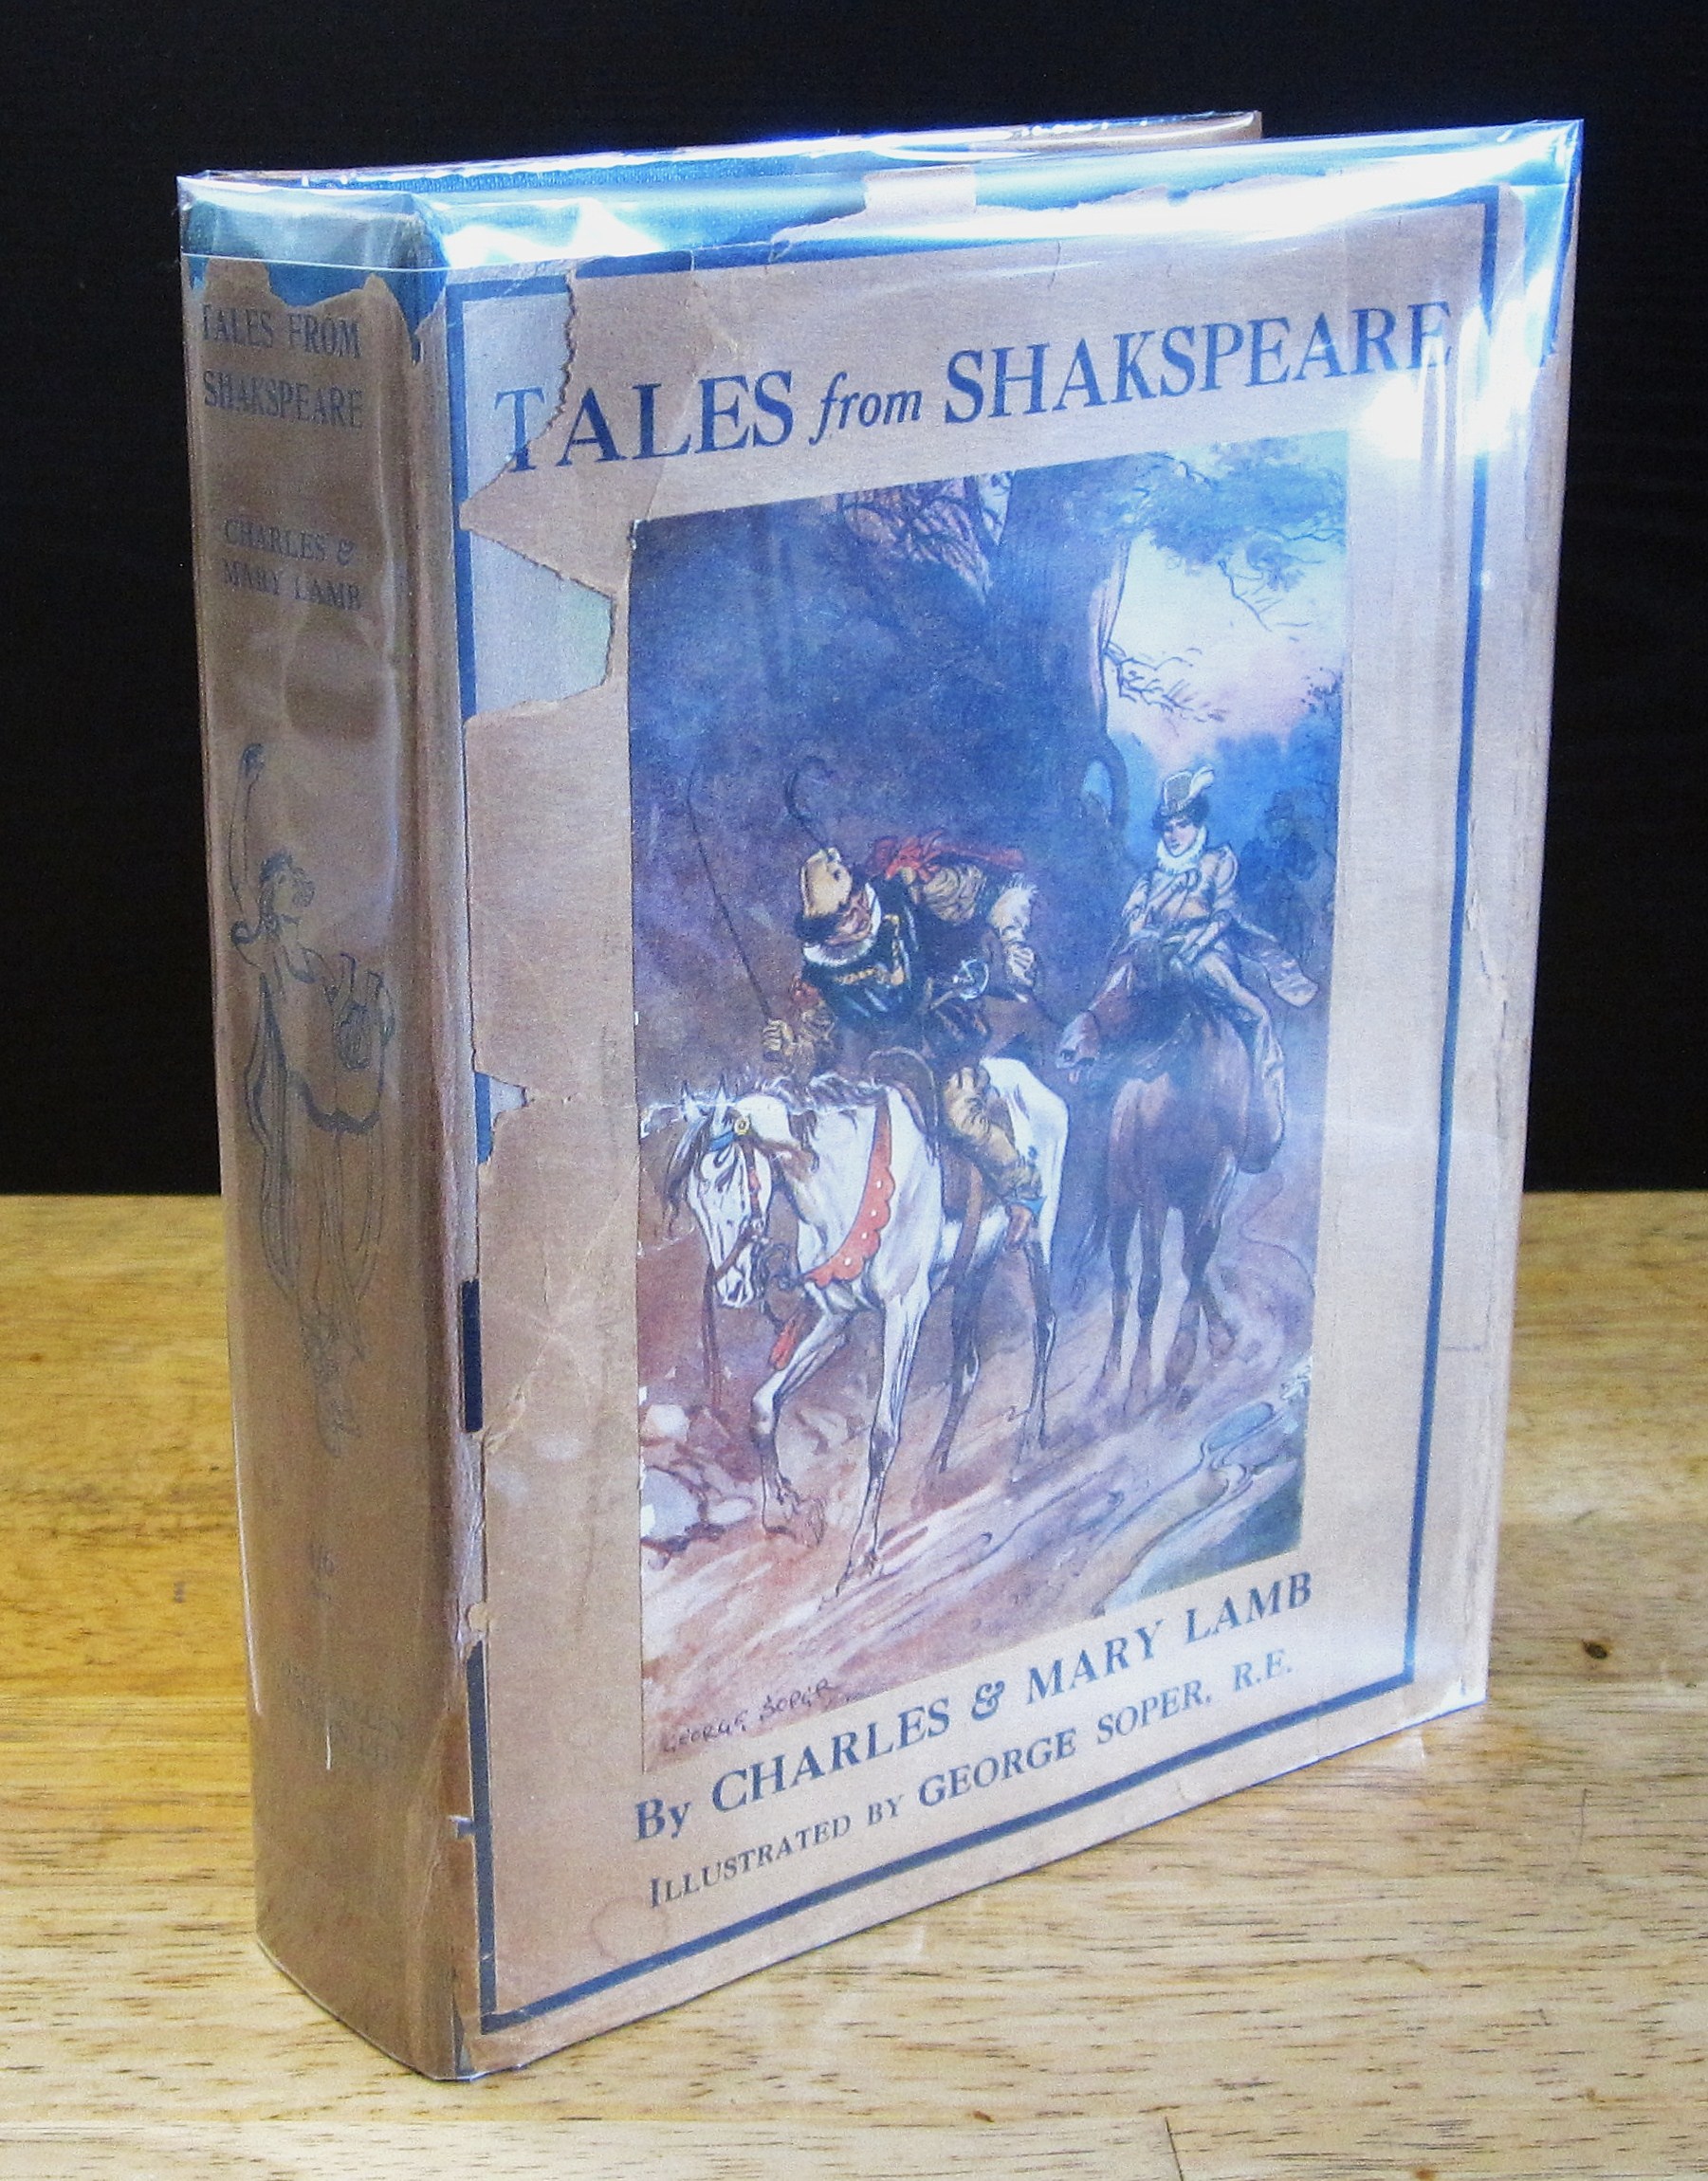 (1929)　Lamb,　Cover　by　George　Hard　Shakespeare　The　Soper　Very　Shakespeare,　William;　Charles　Thus.　and　Mary　Edition　Illustrated　Good　First　BiblioFile　de　from　Tales　(Adaptation):